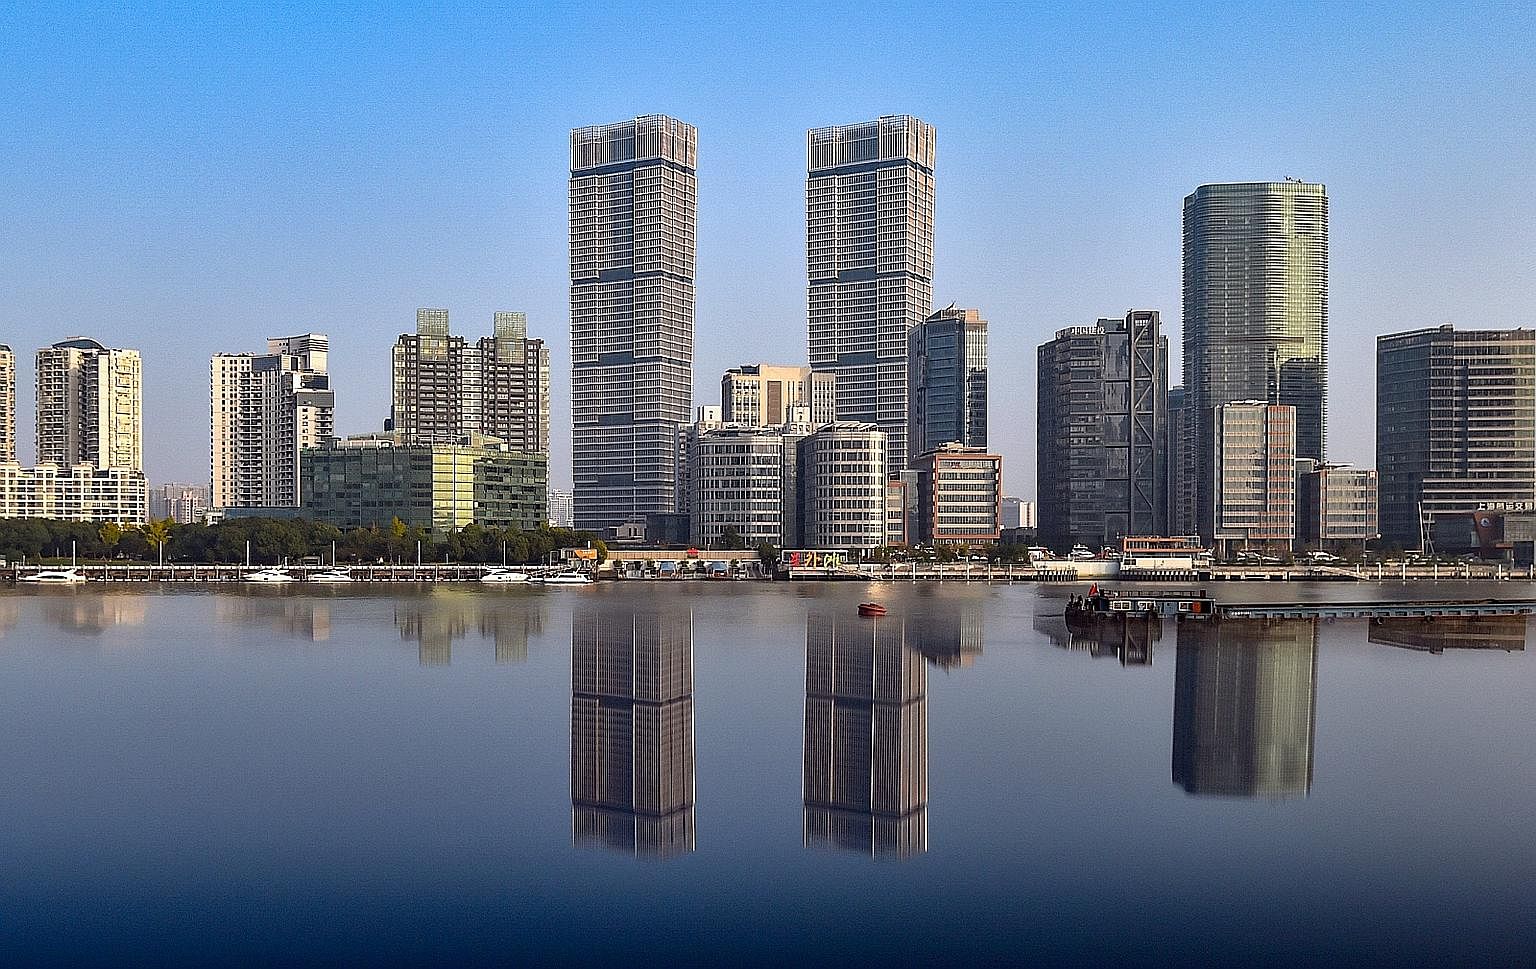 CapitaLand acquired Shanghai's tallest twin towers (left) through a 50:50 joint venture between GIC and Raffles City China Investment Partners III fund. The firm's significant acquisitions in developed markets outside Singapore last year included the